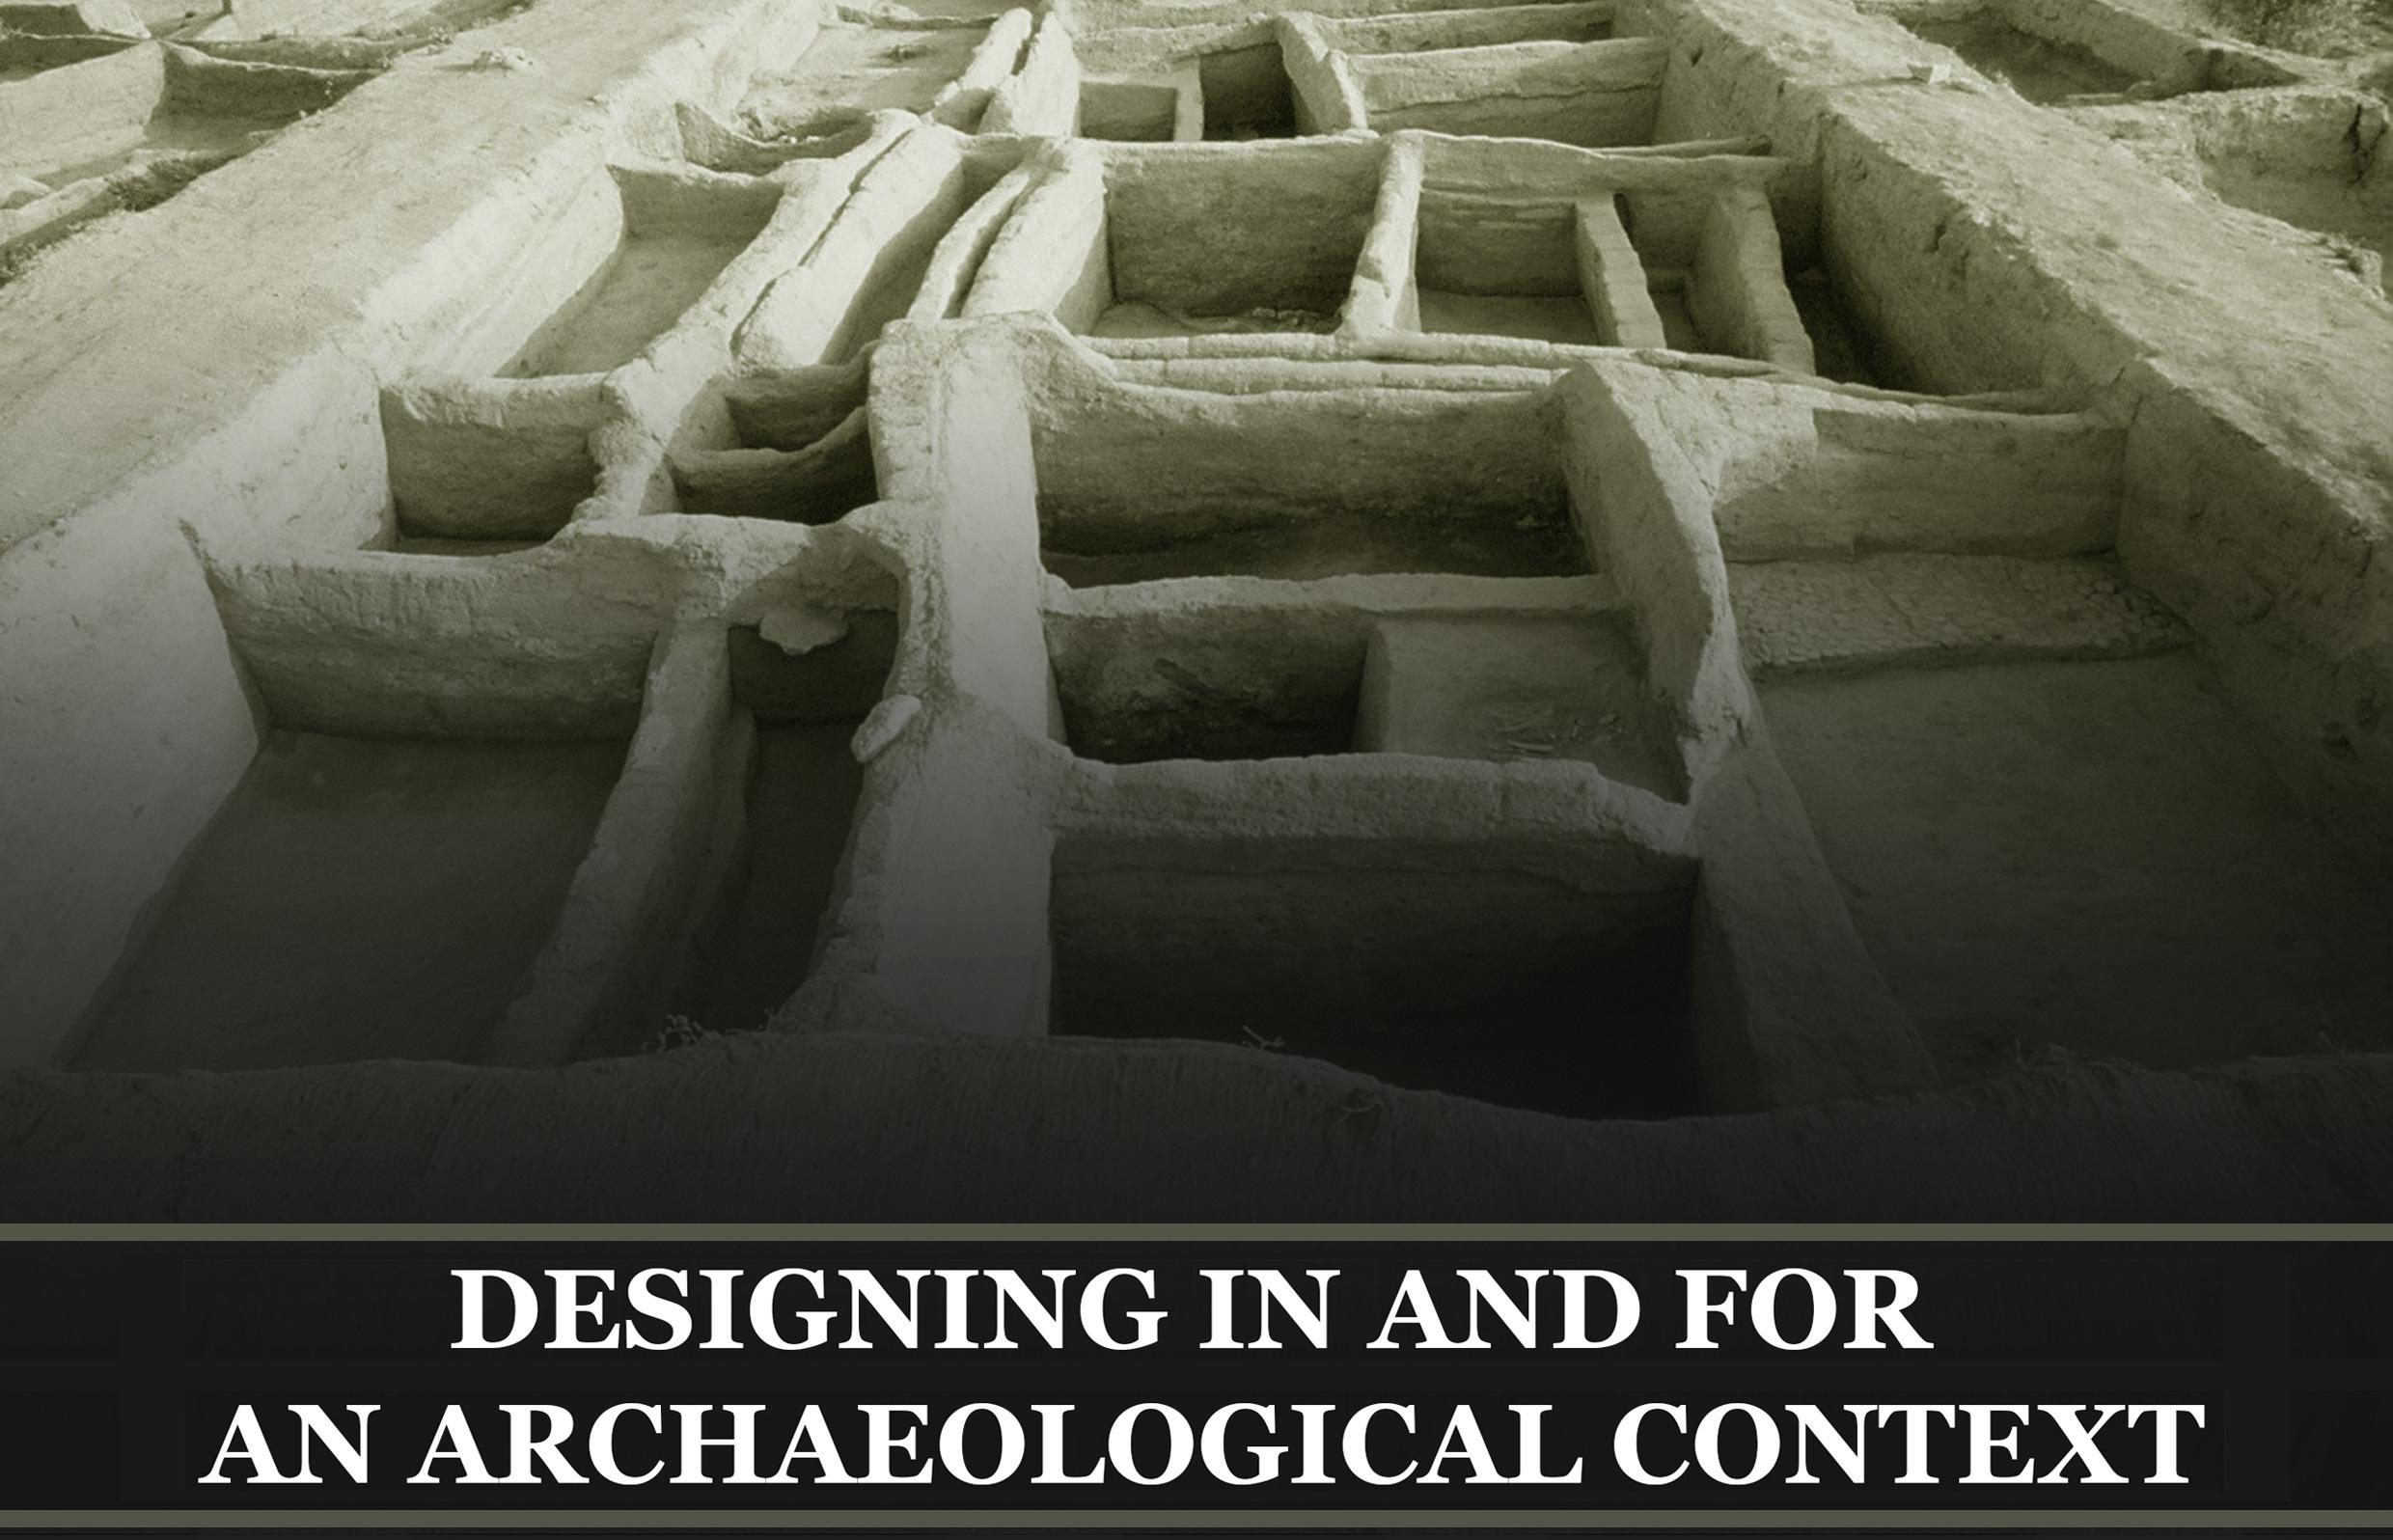 Designing in and for an Archaelogical Context